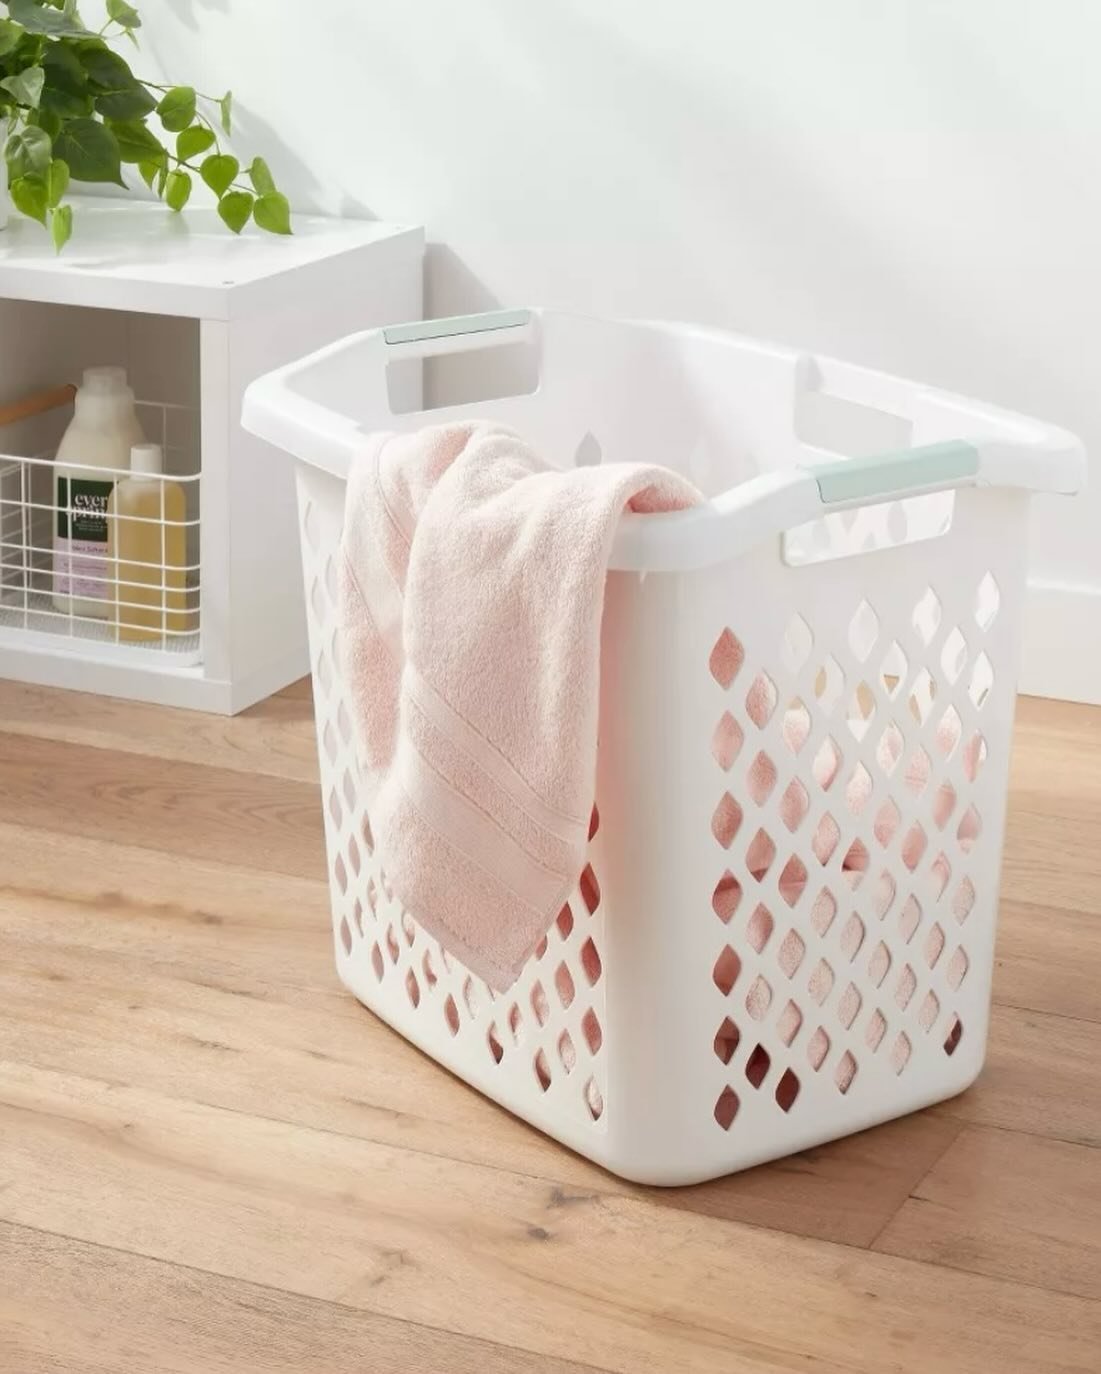 The 2.1bu Lamper available @target is perfect for your daily laundry routine 🧺
 
▫️2.1bu lamper
▫️Rectangular shape
▫️Open-top design
▫️Handles on each side
▫️Mesh design
▫️Solid white hue